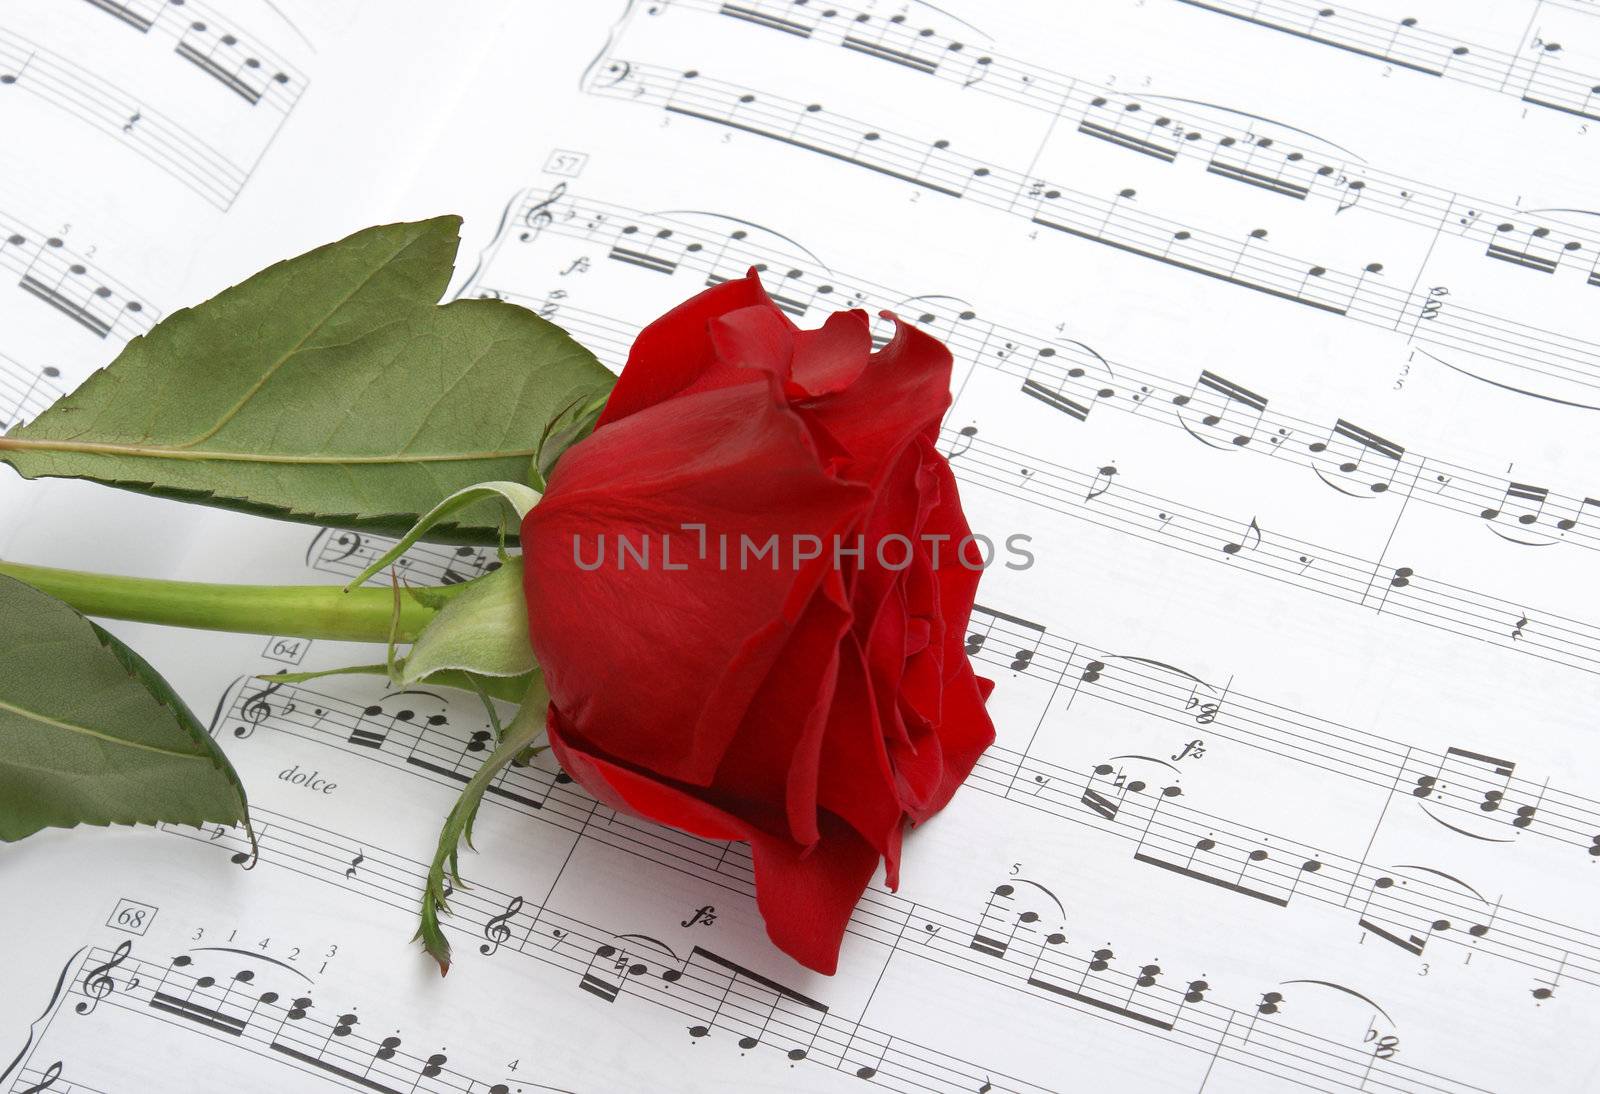 A rose compliments some sheet music to a piano piece.